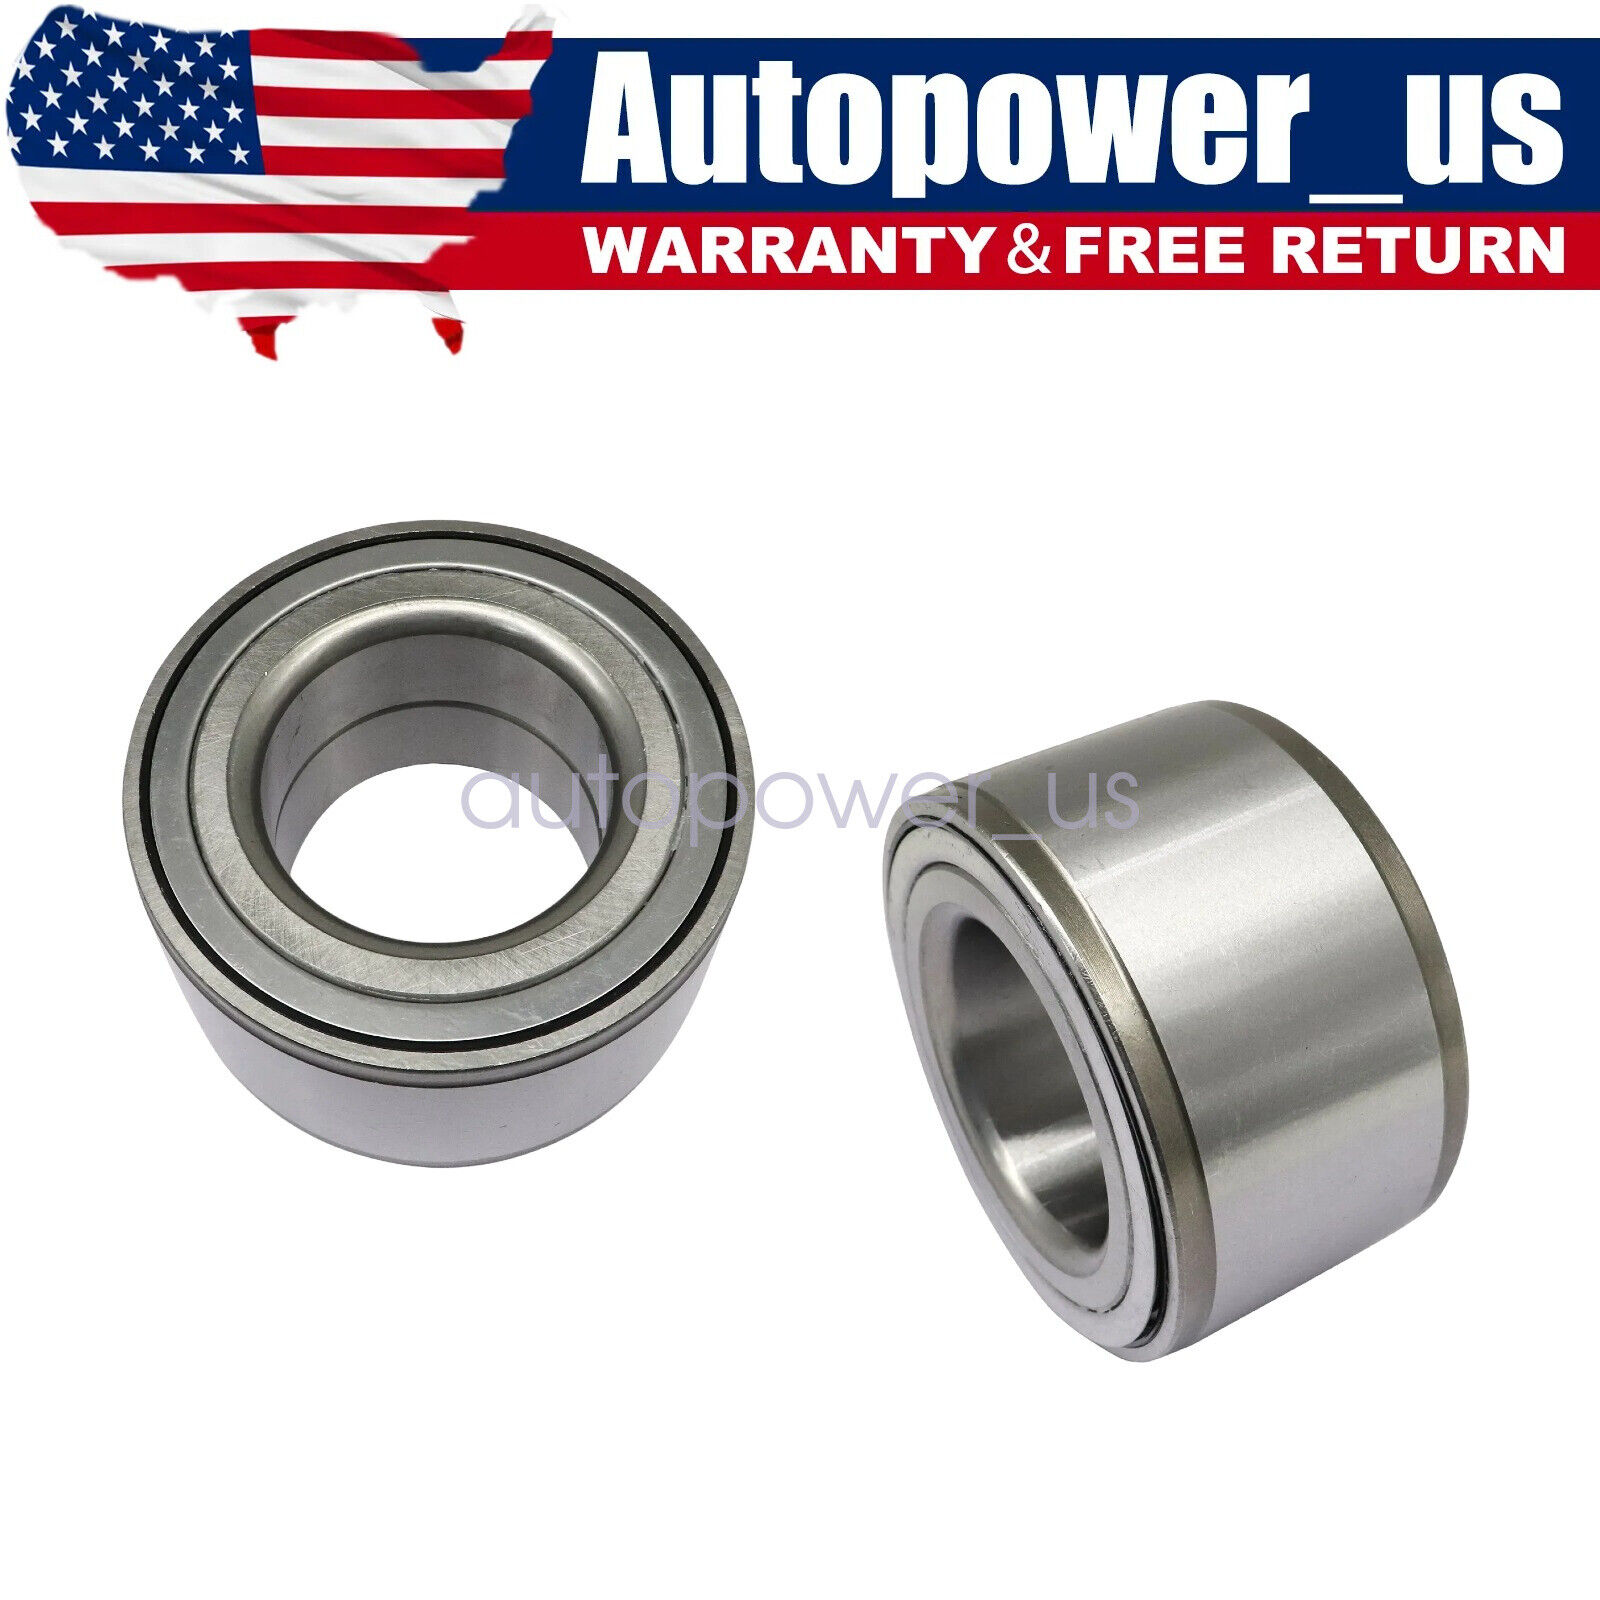 Pair (2) Front Wheel Bearings Kit fit Toyota Sequoia 4Runner Tacoma Tundra